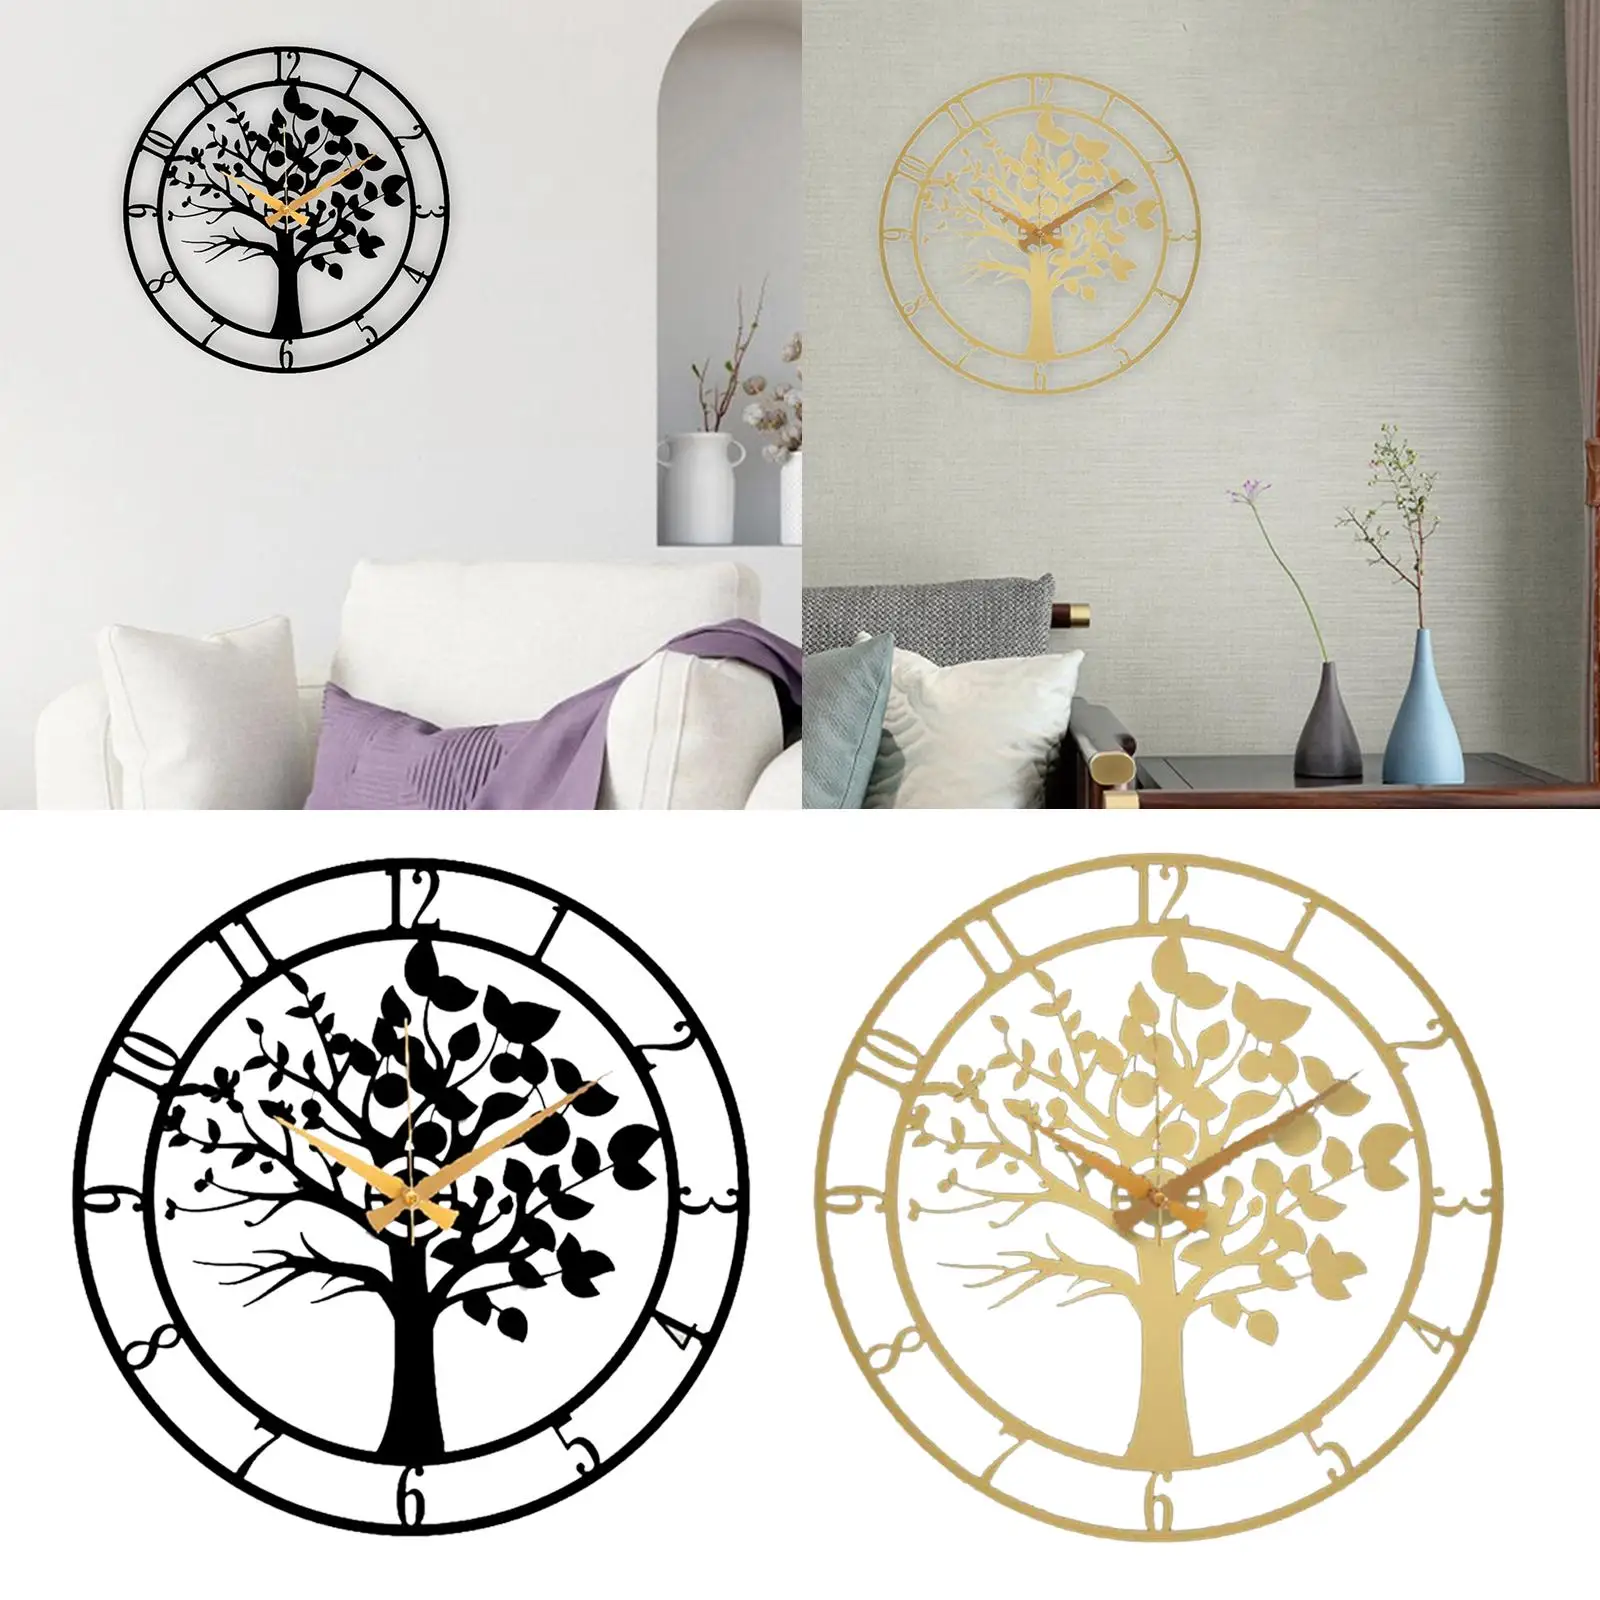 Metal Clock Modern Decorative Hanging Silent Wall Hanging Clocks Large Wall Clock for Kitchen Farmhouse Home Office Living Room